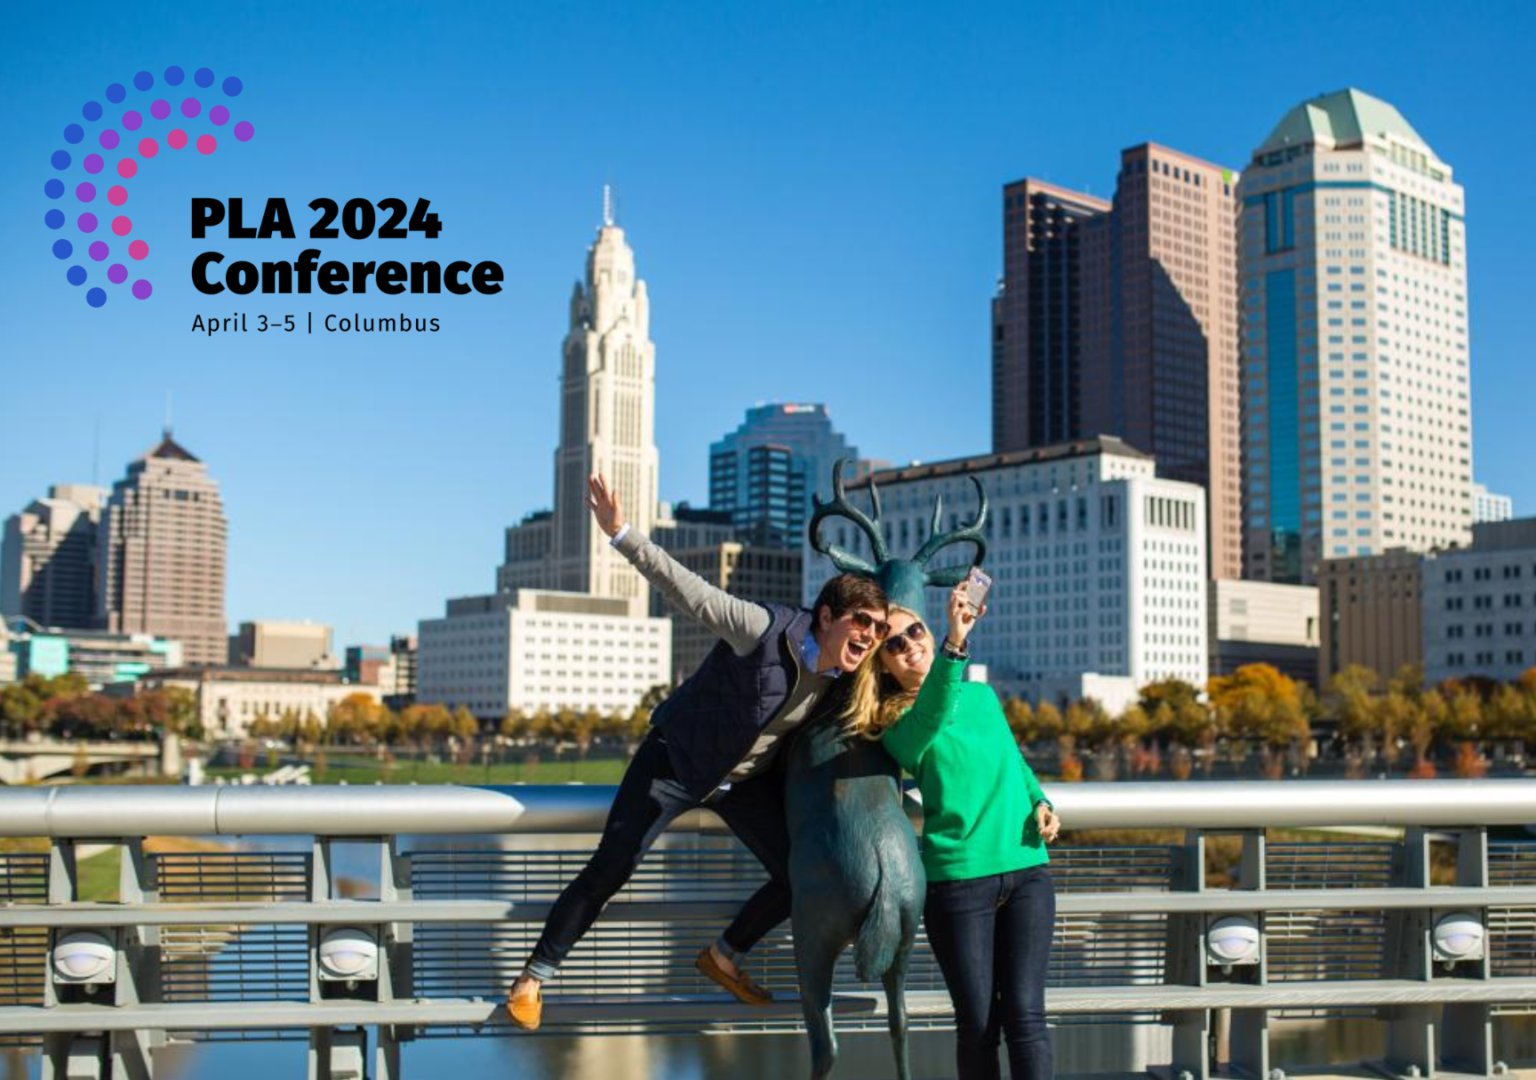 Registration Now Open for PLA 2024 Conference in Columbus Ohio